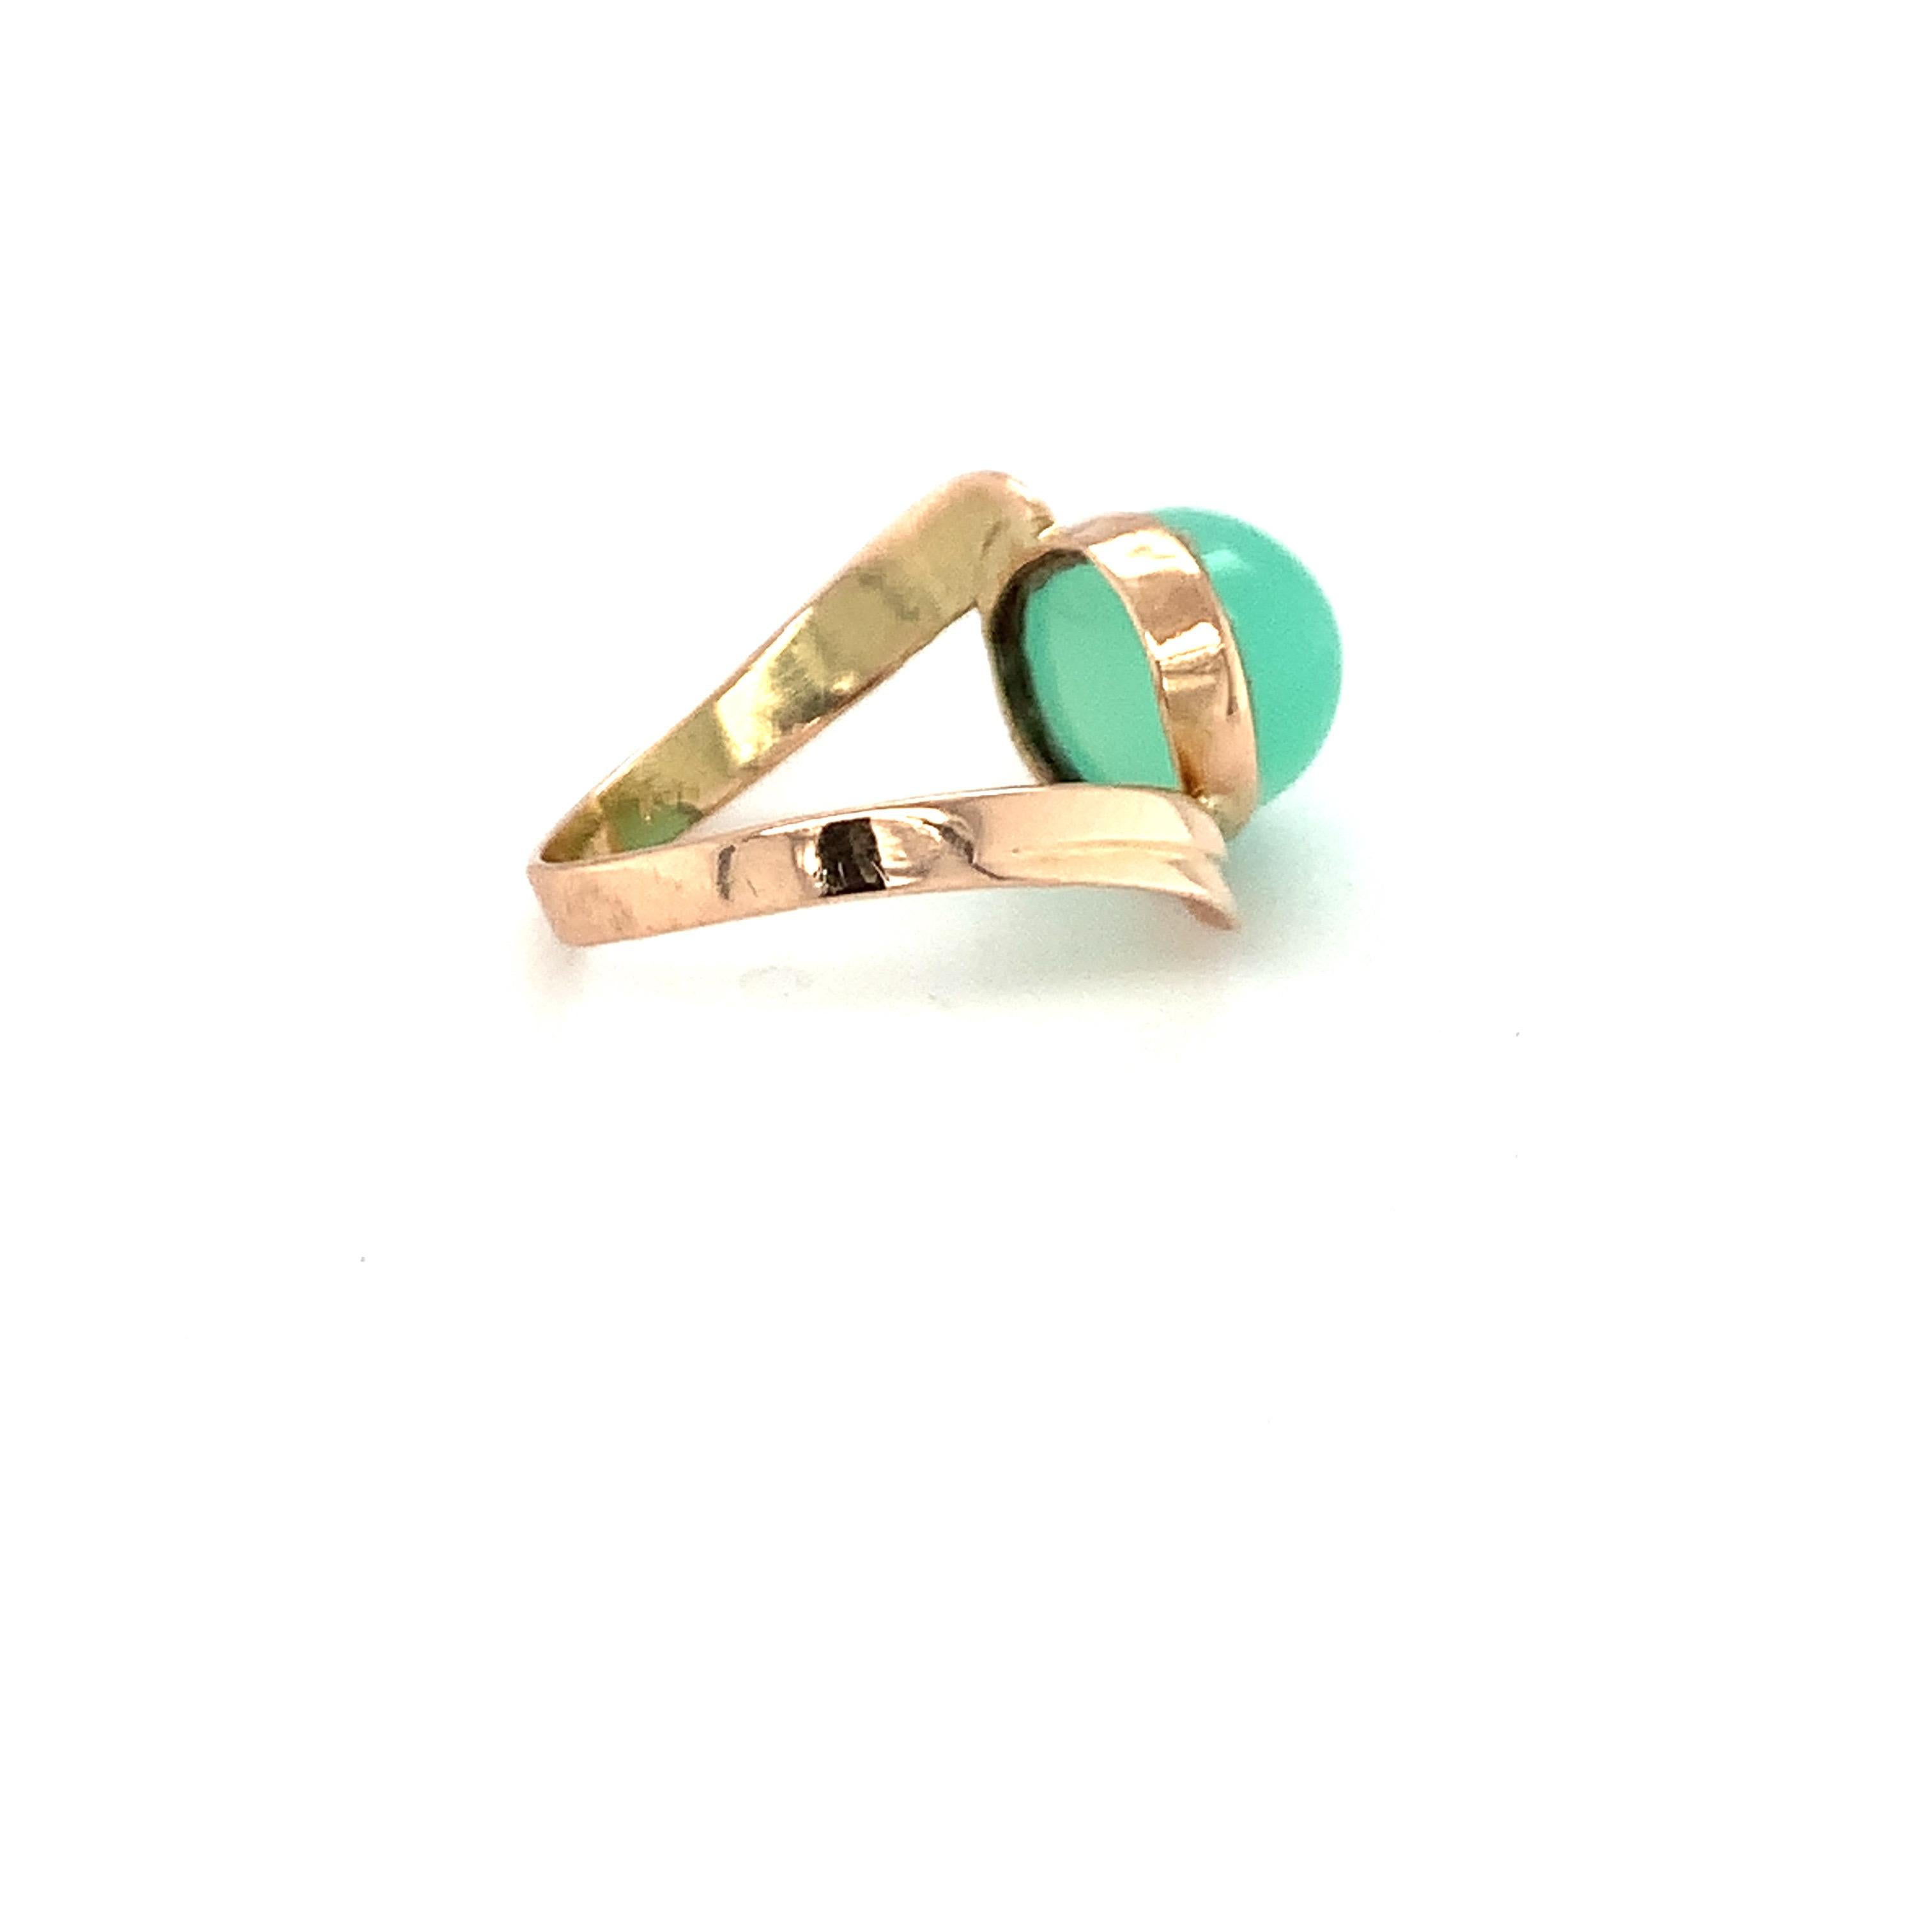 Hand cut and polished natural green chalcedony ring is crafted with hand in 14K yellow gold. 
Ideal for casual daily wear.
Image is enlarged to get a closer view.
Ethically sourced natural gem stone.